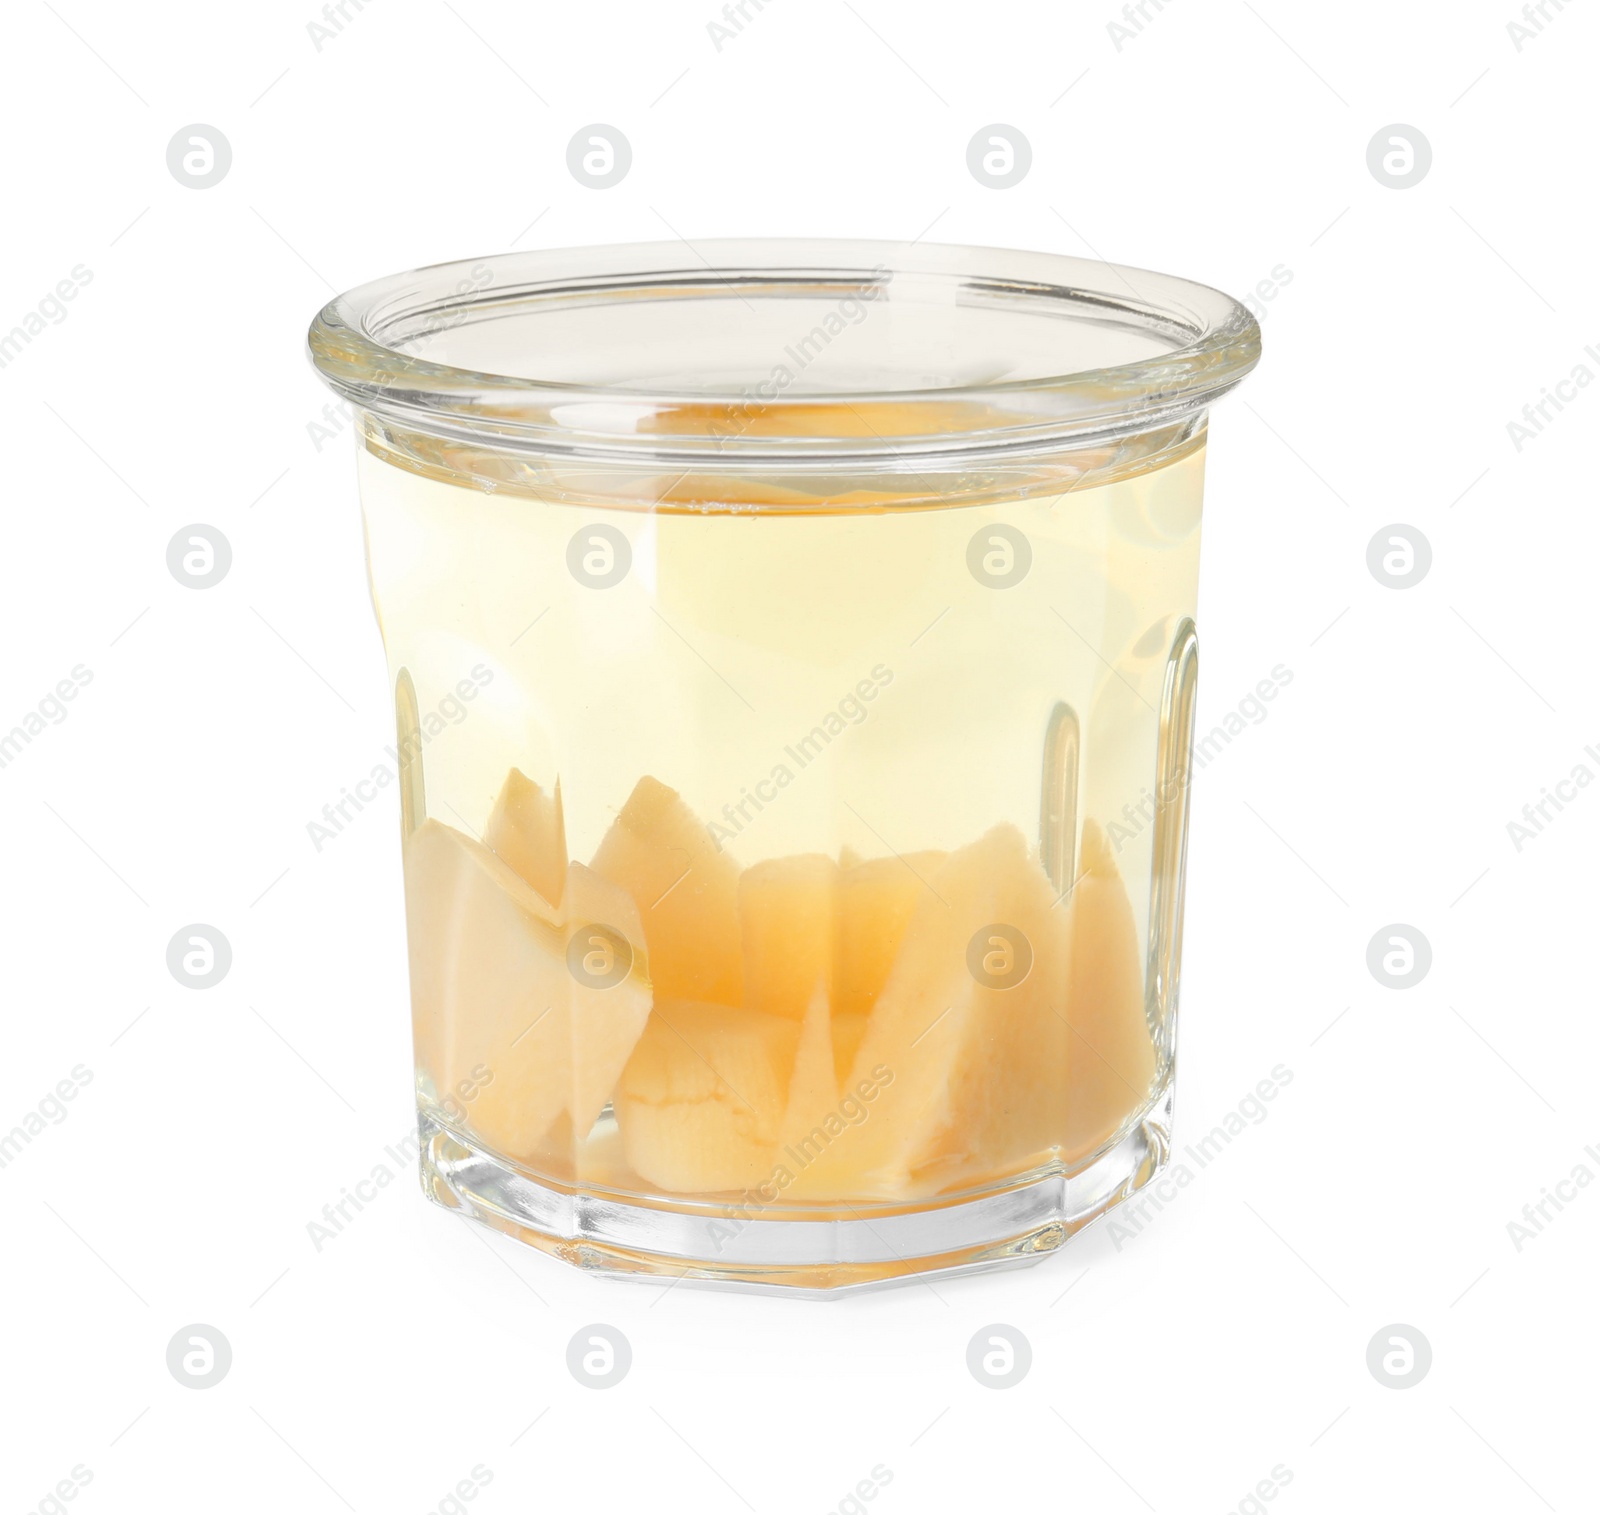 Photo of Delicious quince drink in glass isolated on white